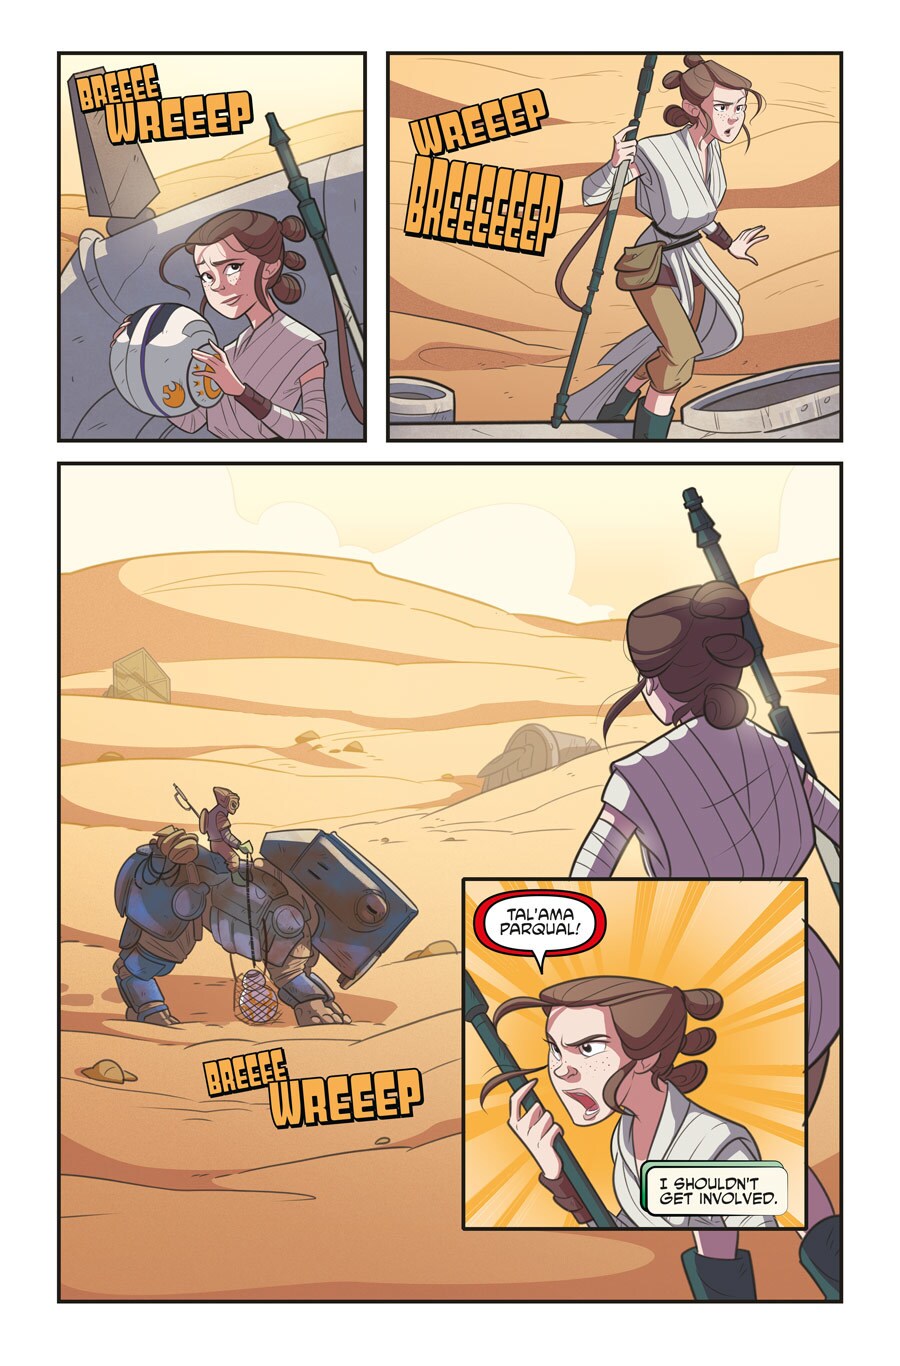 A page from the comic book Star Wars Forces of Destiny: Rey depicts Rey meeting BB-8.